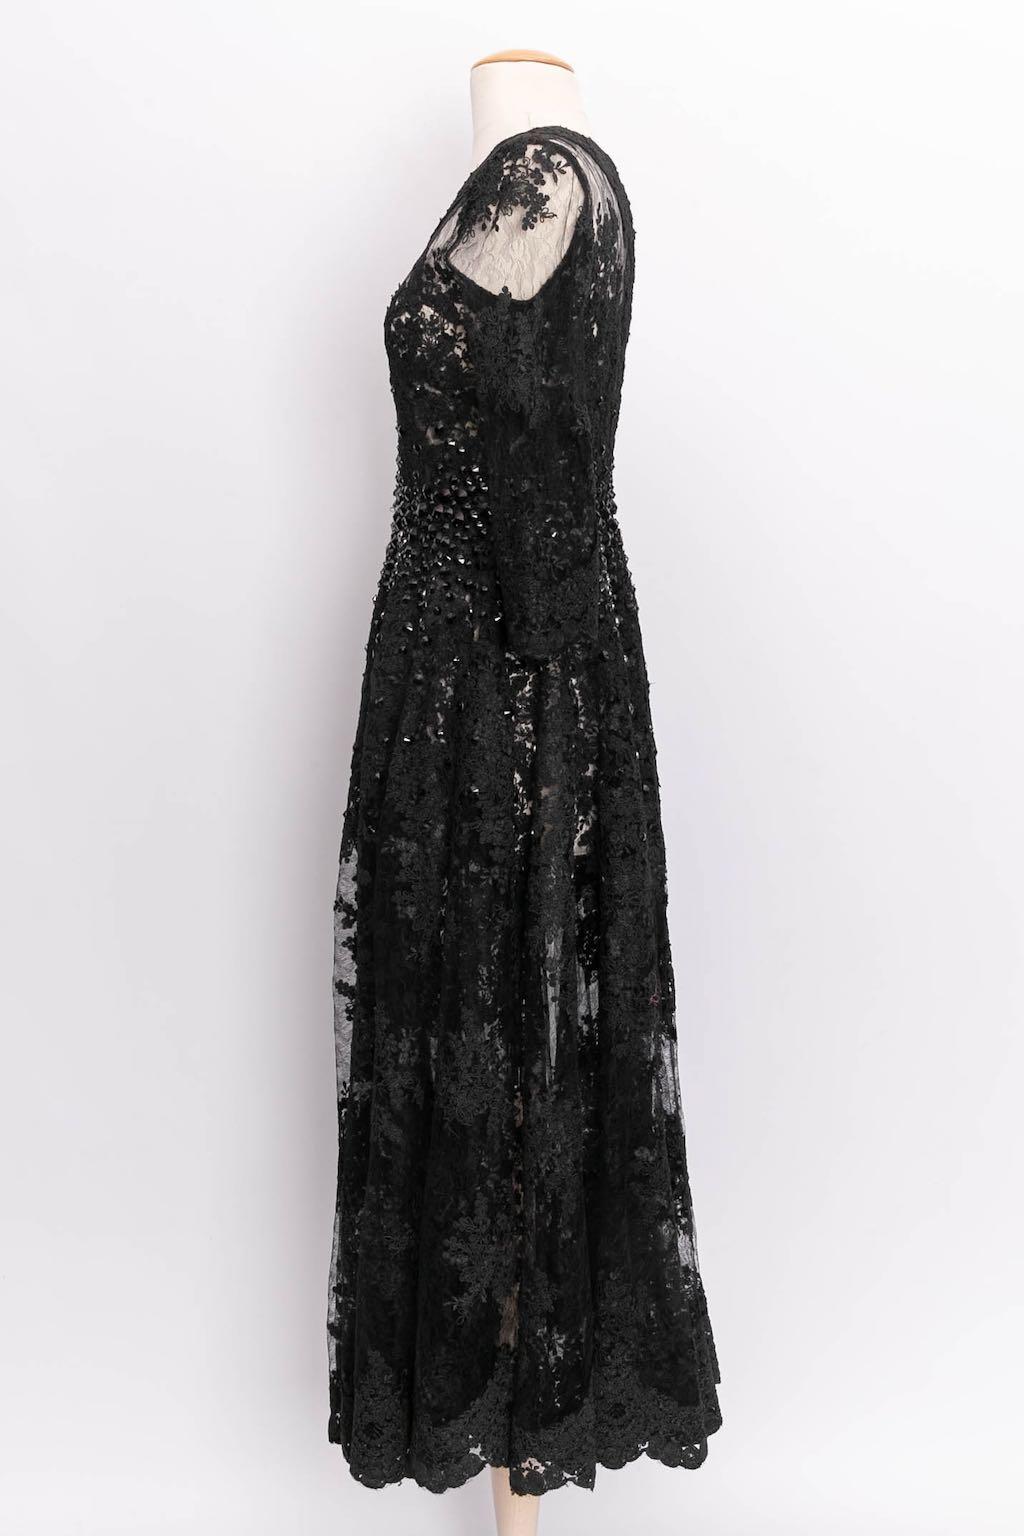 Baron Haute Couture - Lace dress embroidered with black beads. No composition or size tag, it fits a size 36FR/38FR.

Additional information: 
Dimensions: Shoulders: 35 cm (13.77